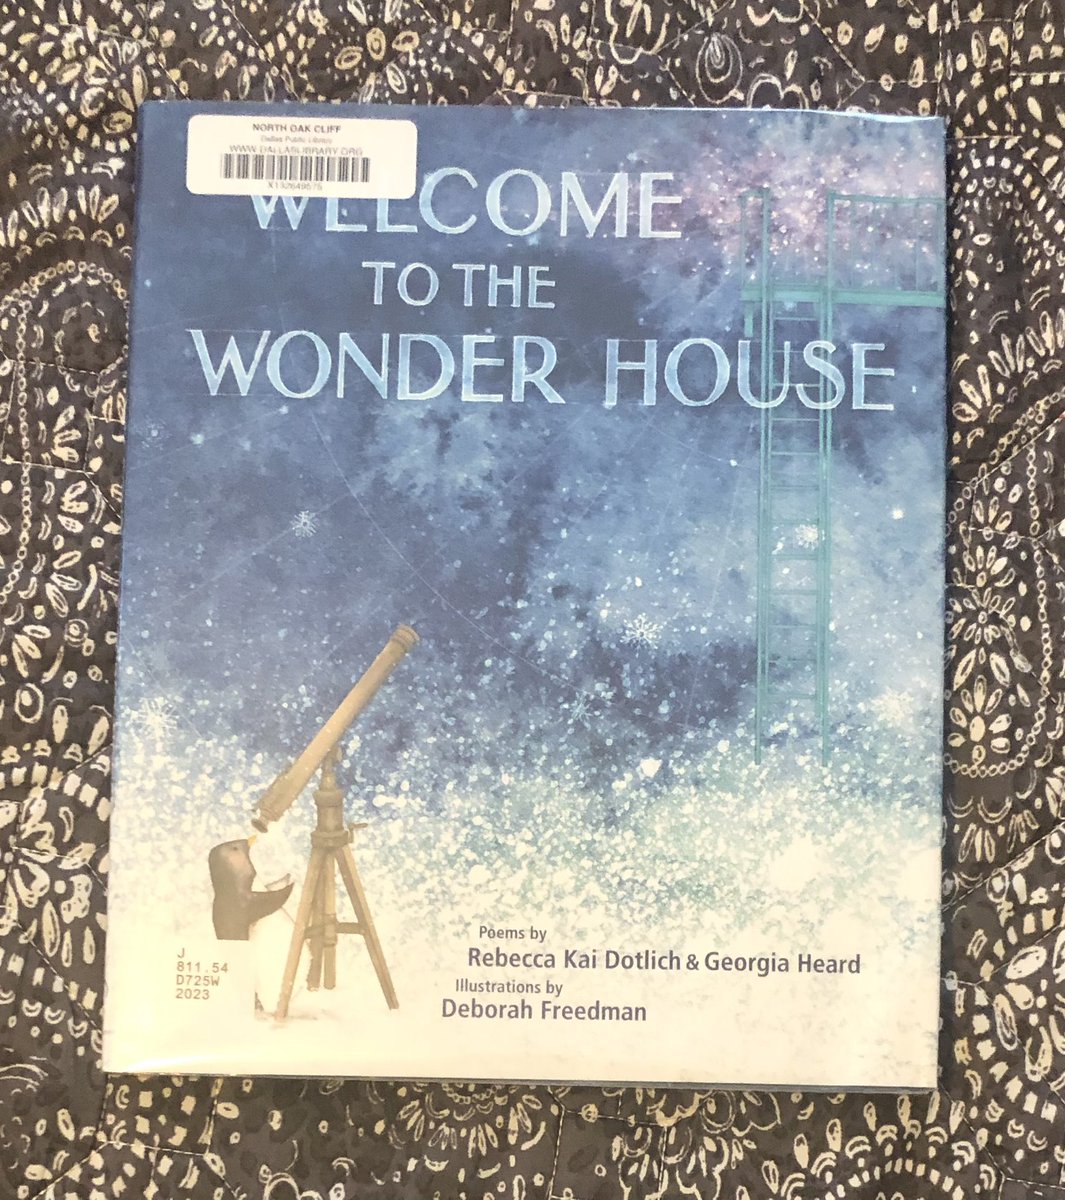 Poems groups loosely together by types of wonderings: time, place, imagination, nature. Love the illustrations: a mood of the colors on each page with its own background color. Perfect mix! @Rebeccakai @GeorgiaHeard1 @DeborahFreedman @DISD_Libraries #PoetryMonth #bookaday